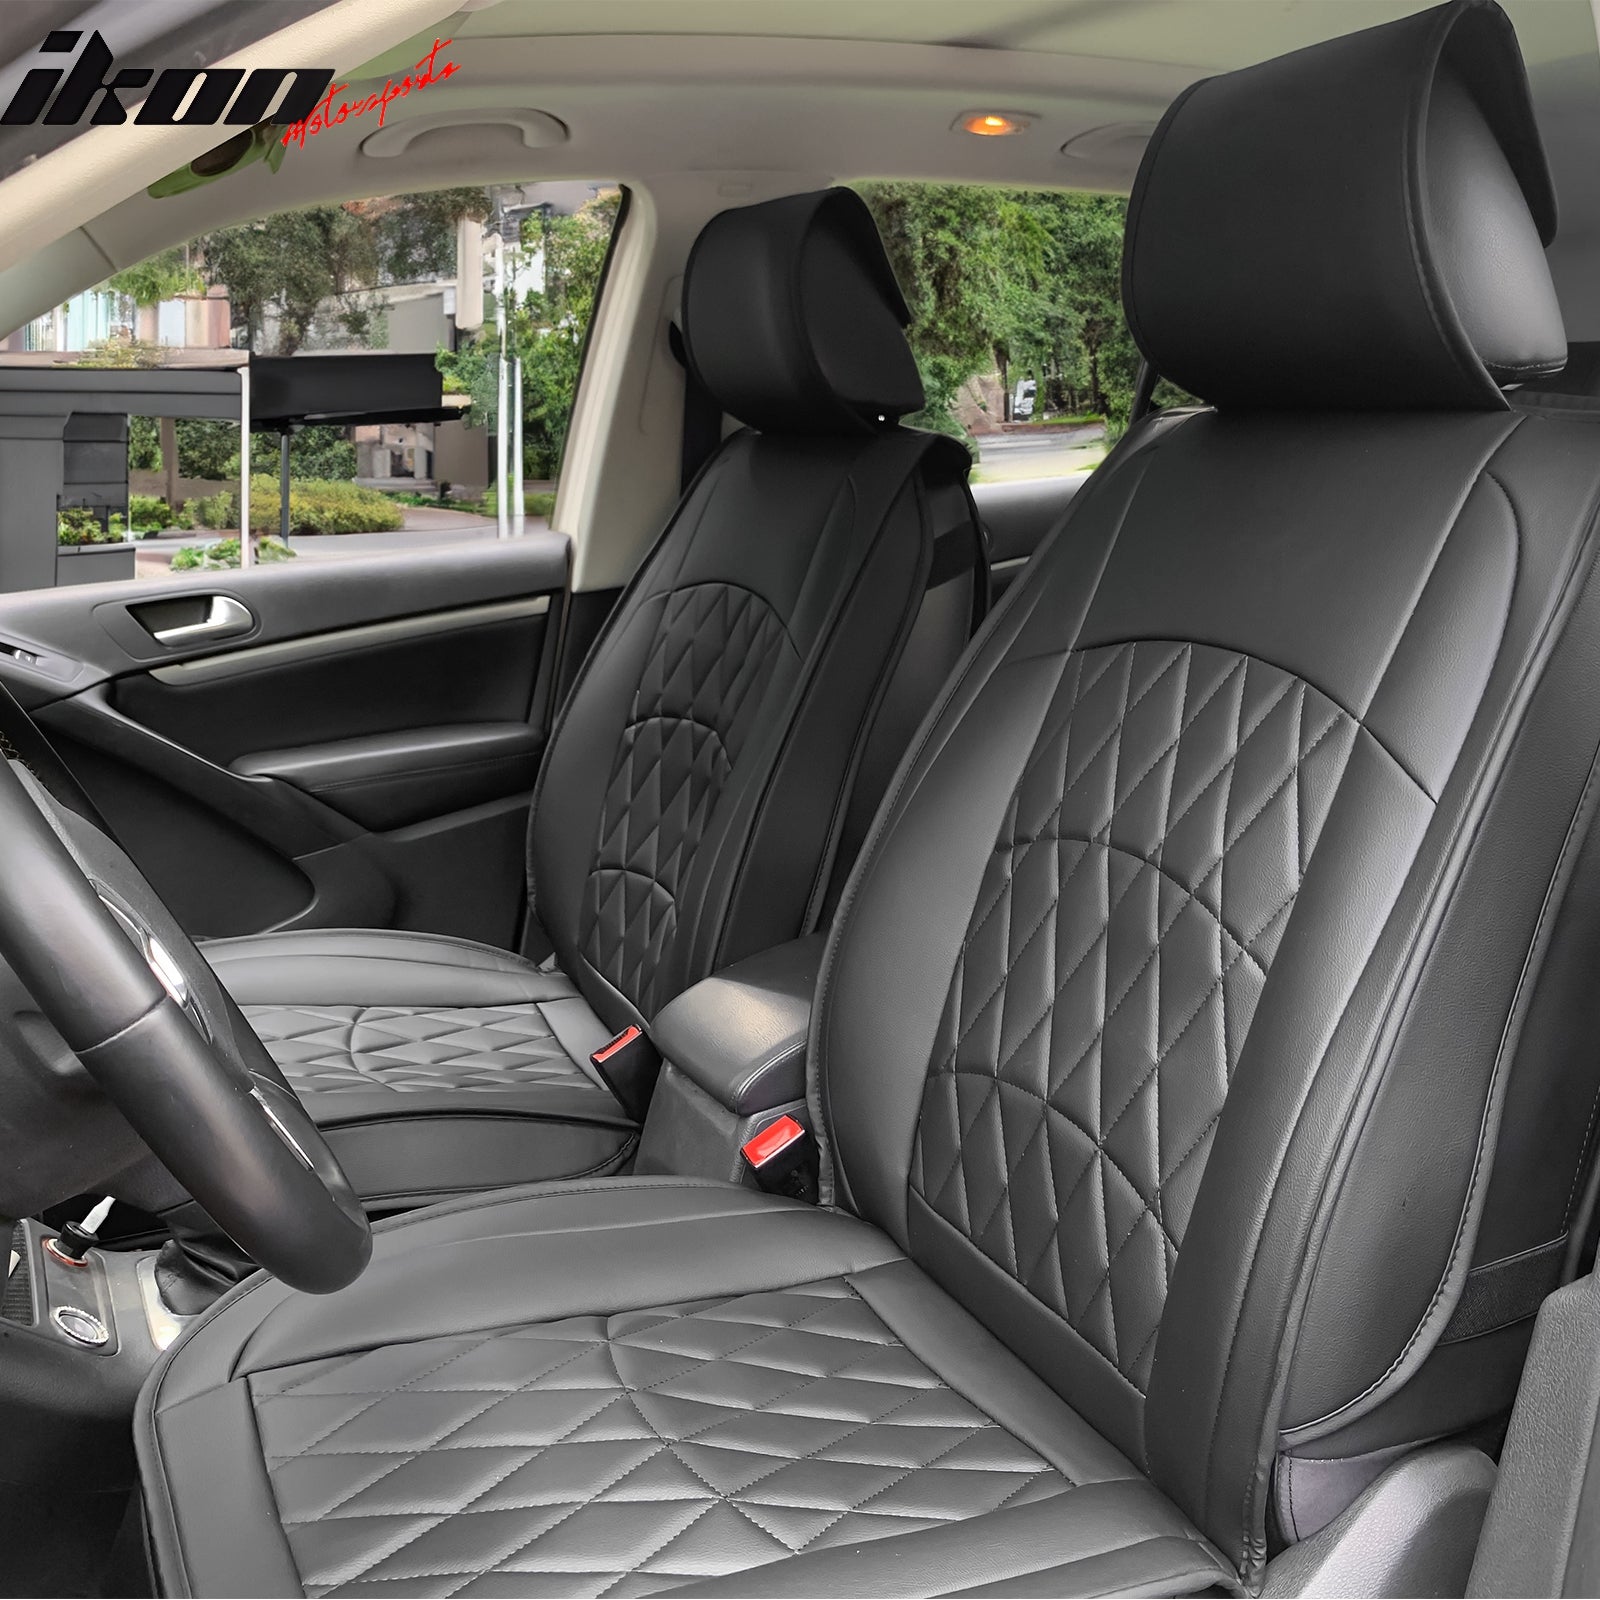 Car Seat Cover PU Leather Seat Covers For Car Seat Protector Four